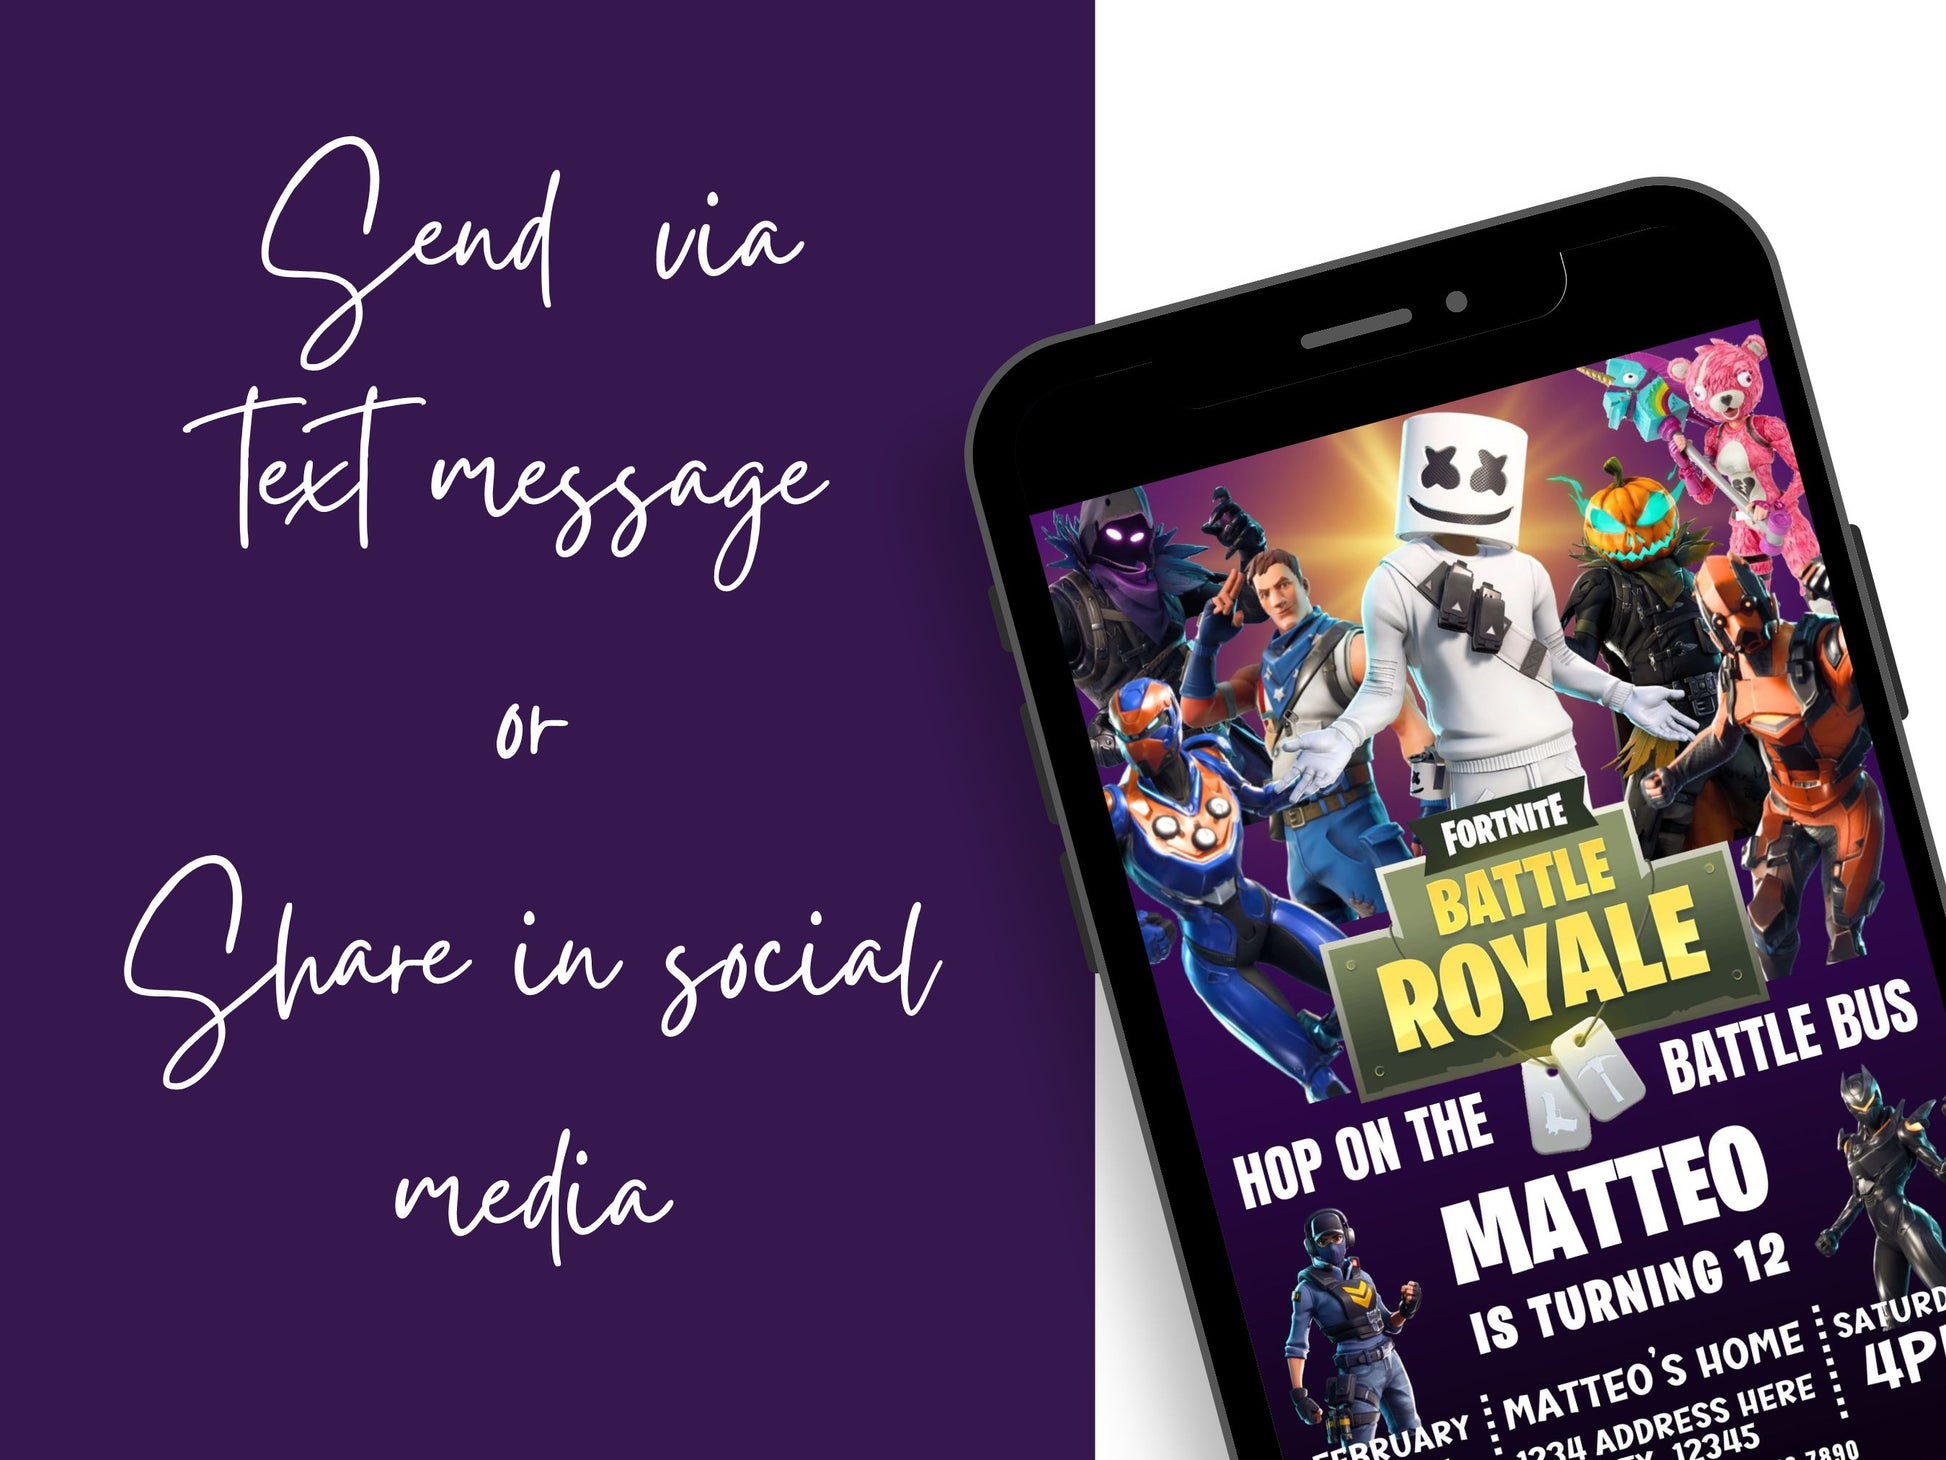 Fortnite birthday invitation template featuring iconic gaming graphics.